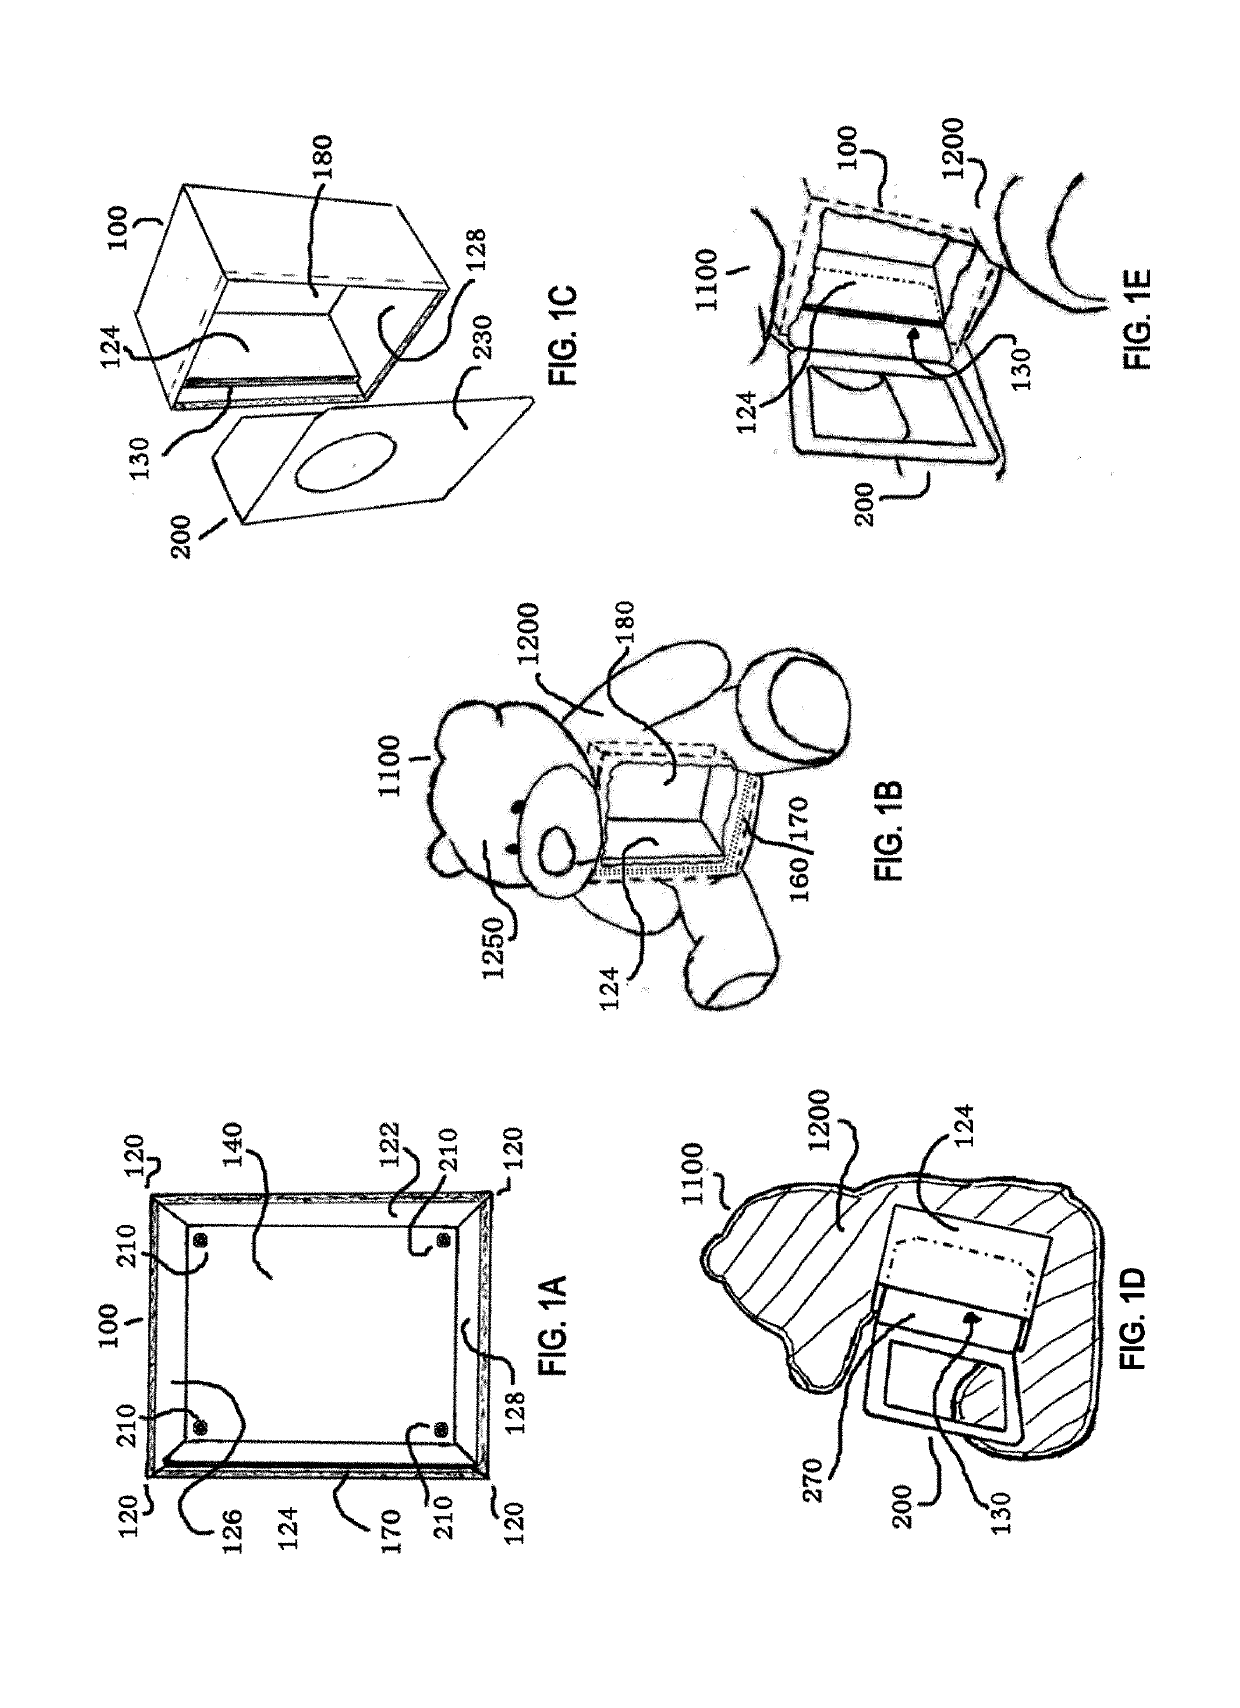 DETACHABLE MULTI-FUNCTIONAL HOUSING COMPARTMENT INSERT WITH Attachable ACCESSORY Templates